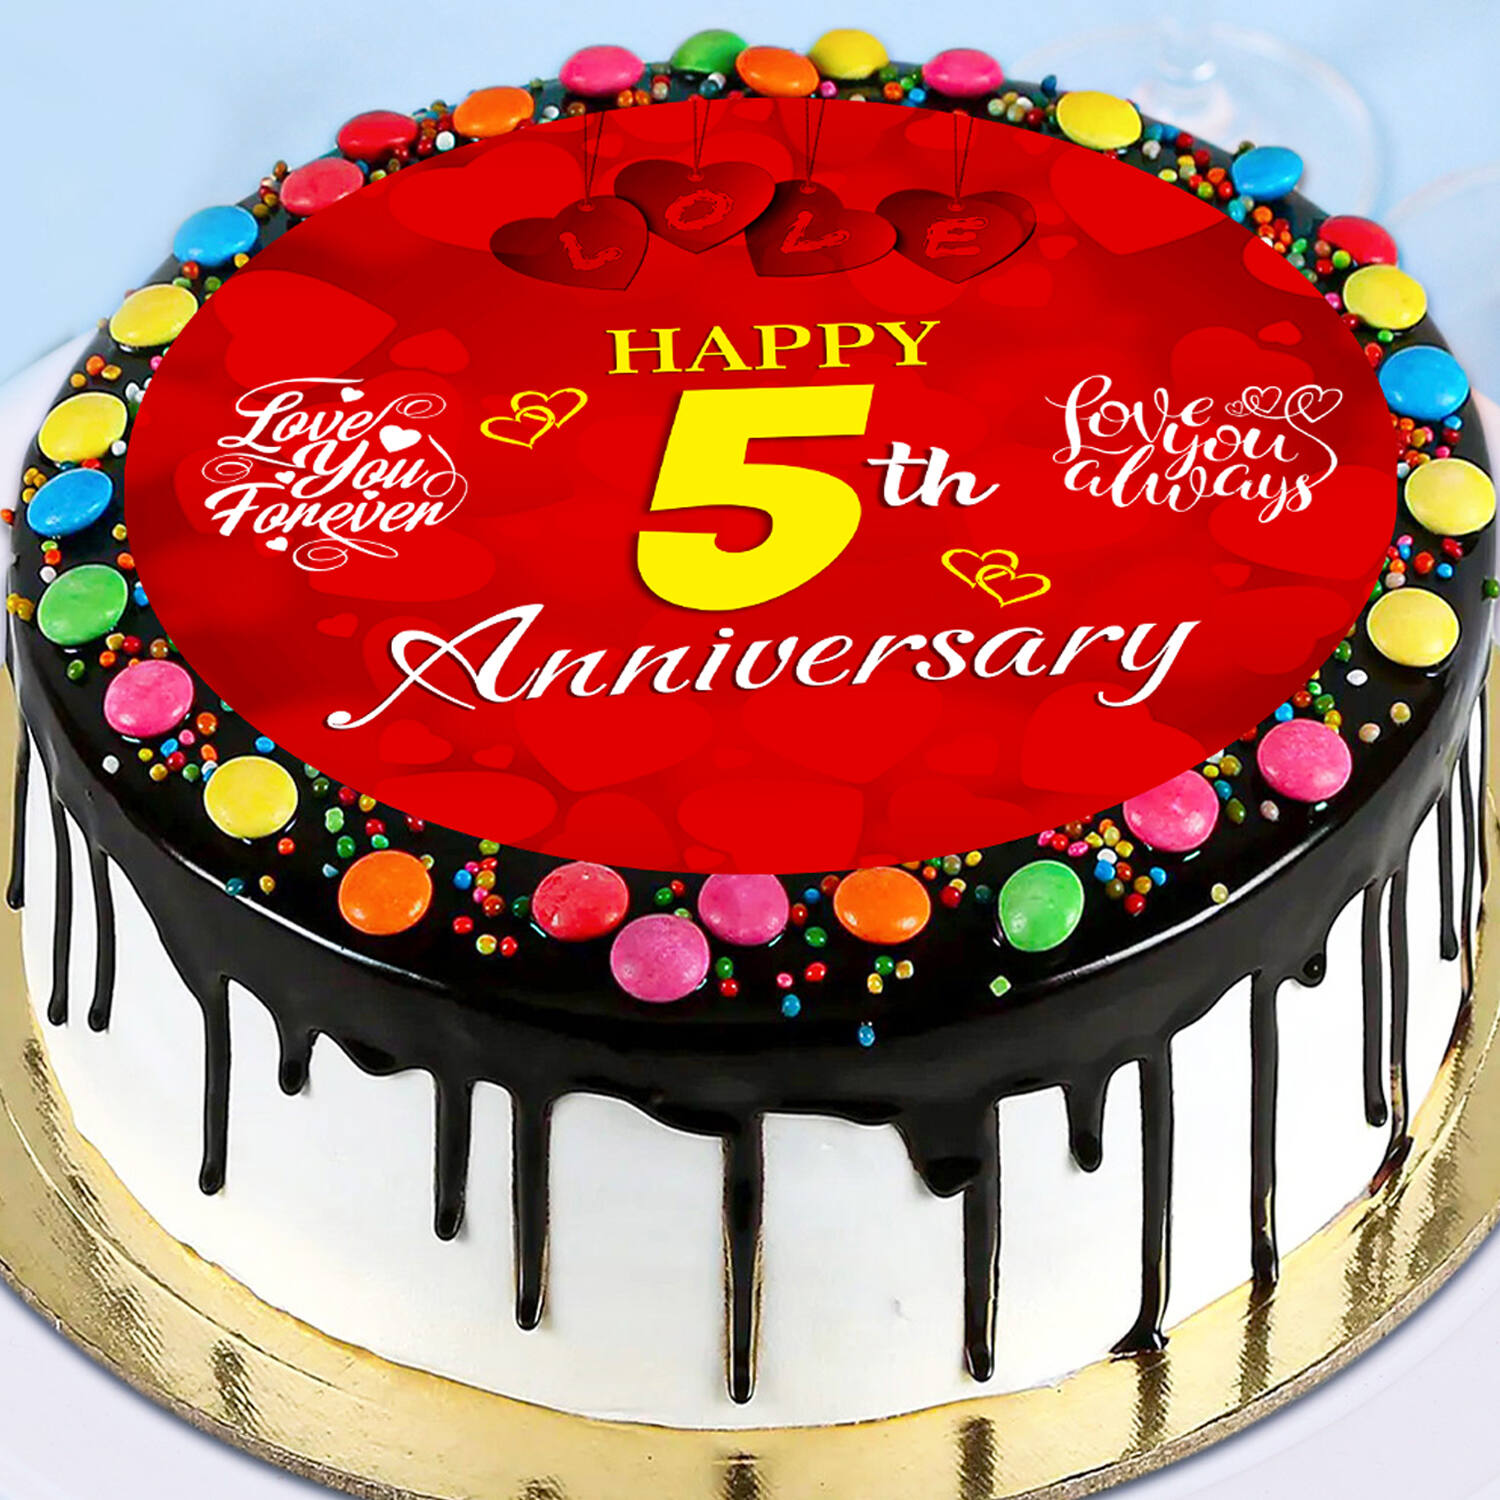 Create Online 5th Anniversary Cake With Name